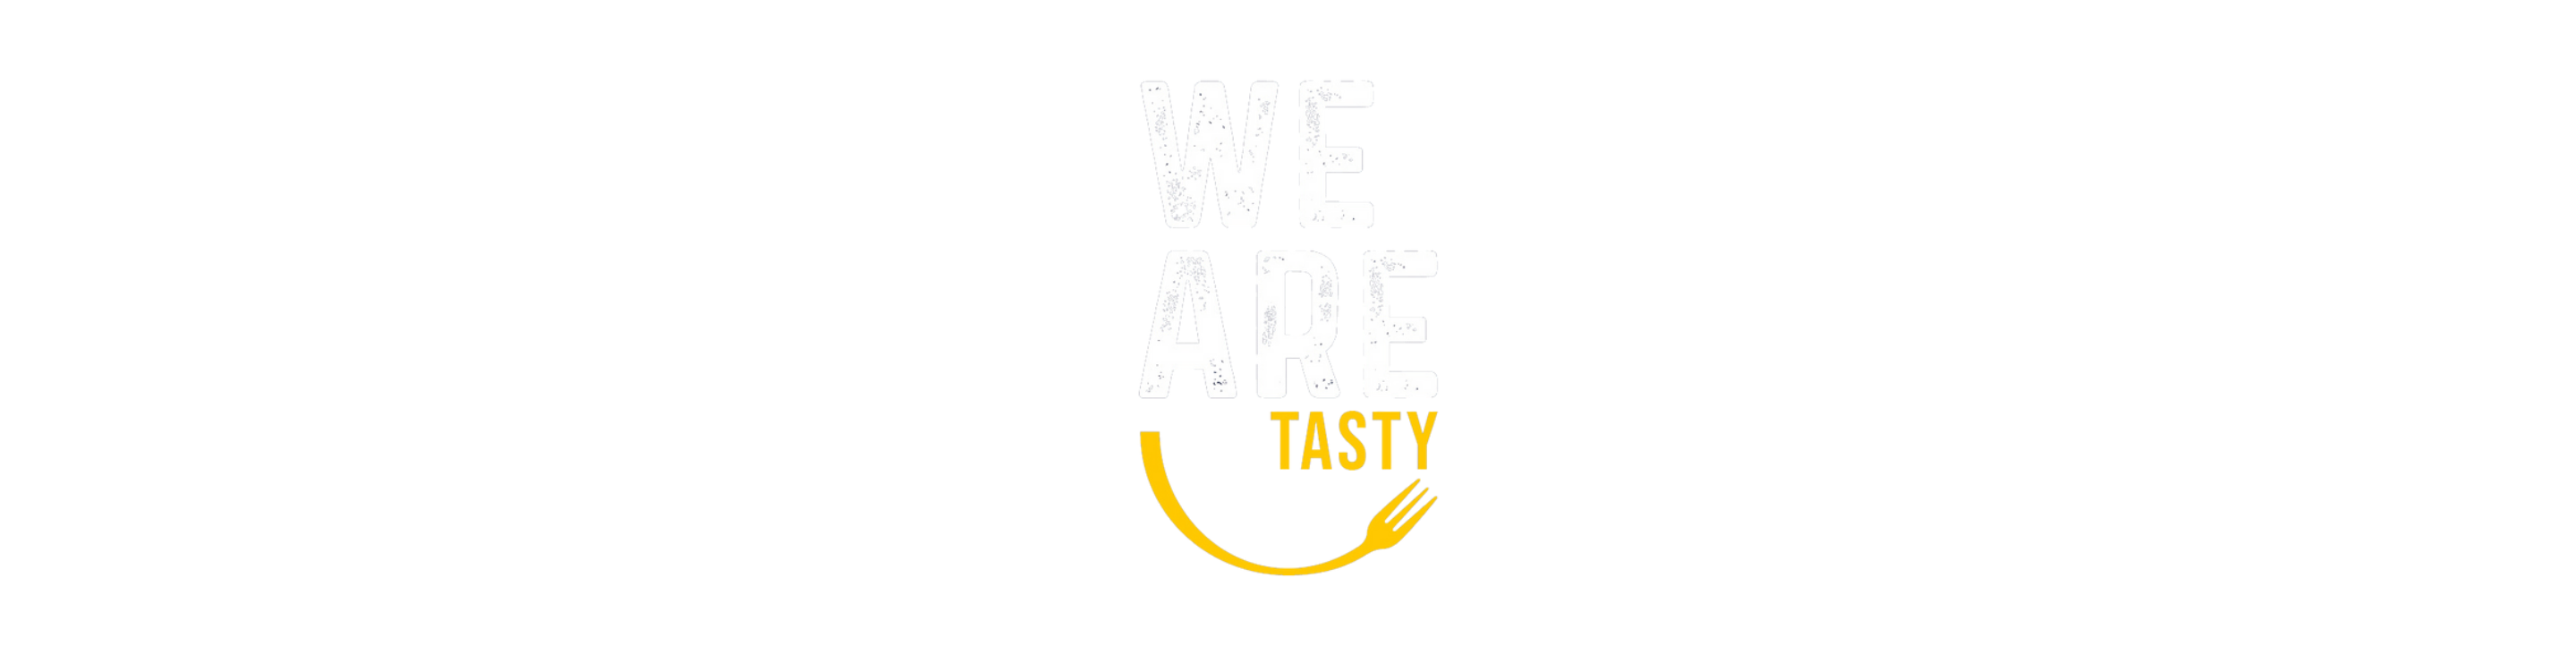 WE ARE TASTY